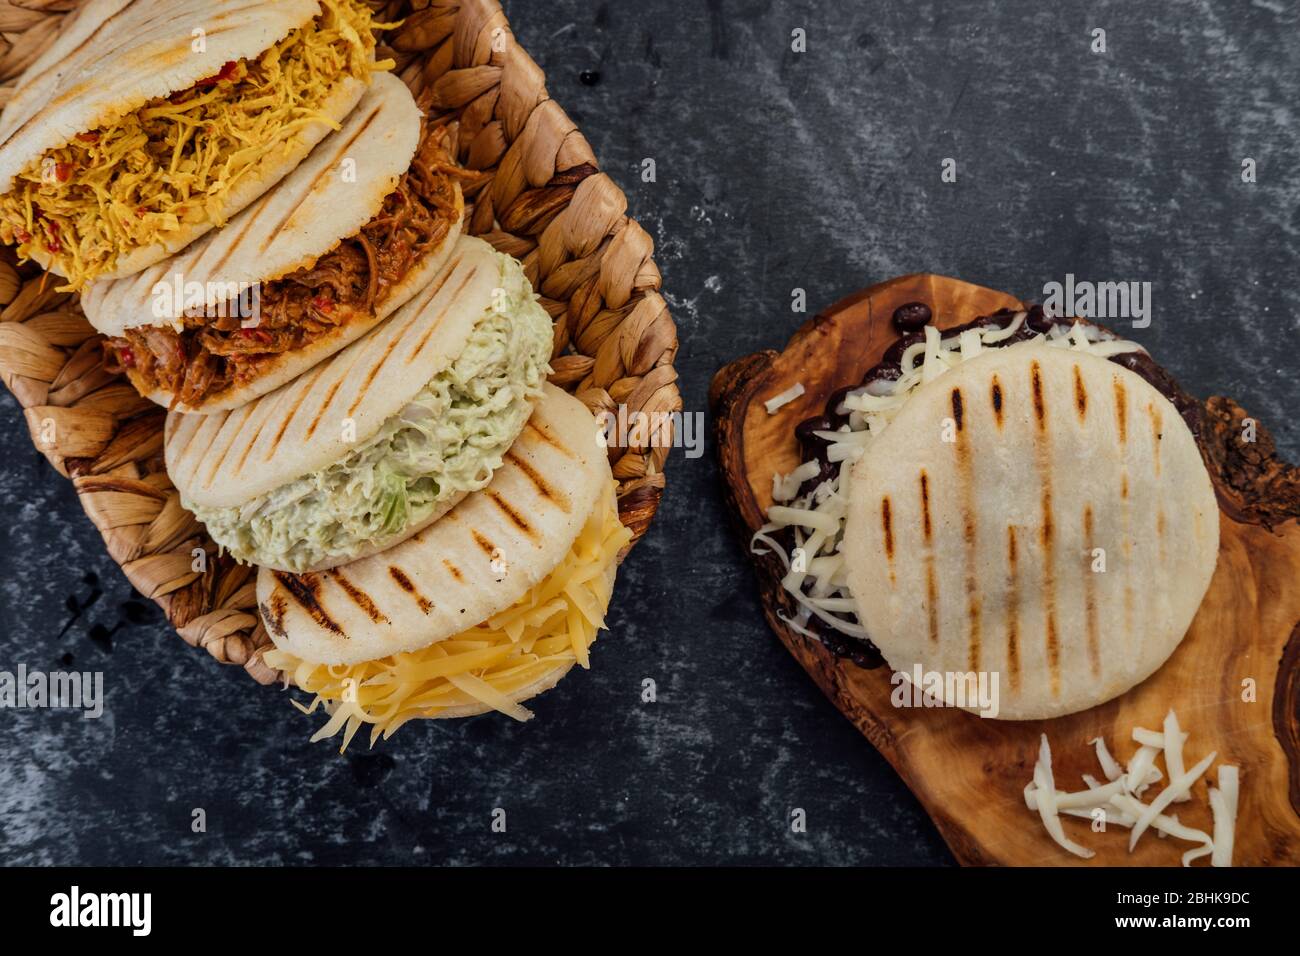 Top view of various types of typical Venezuelan arepas in a woven basket Stock Photo